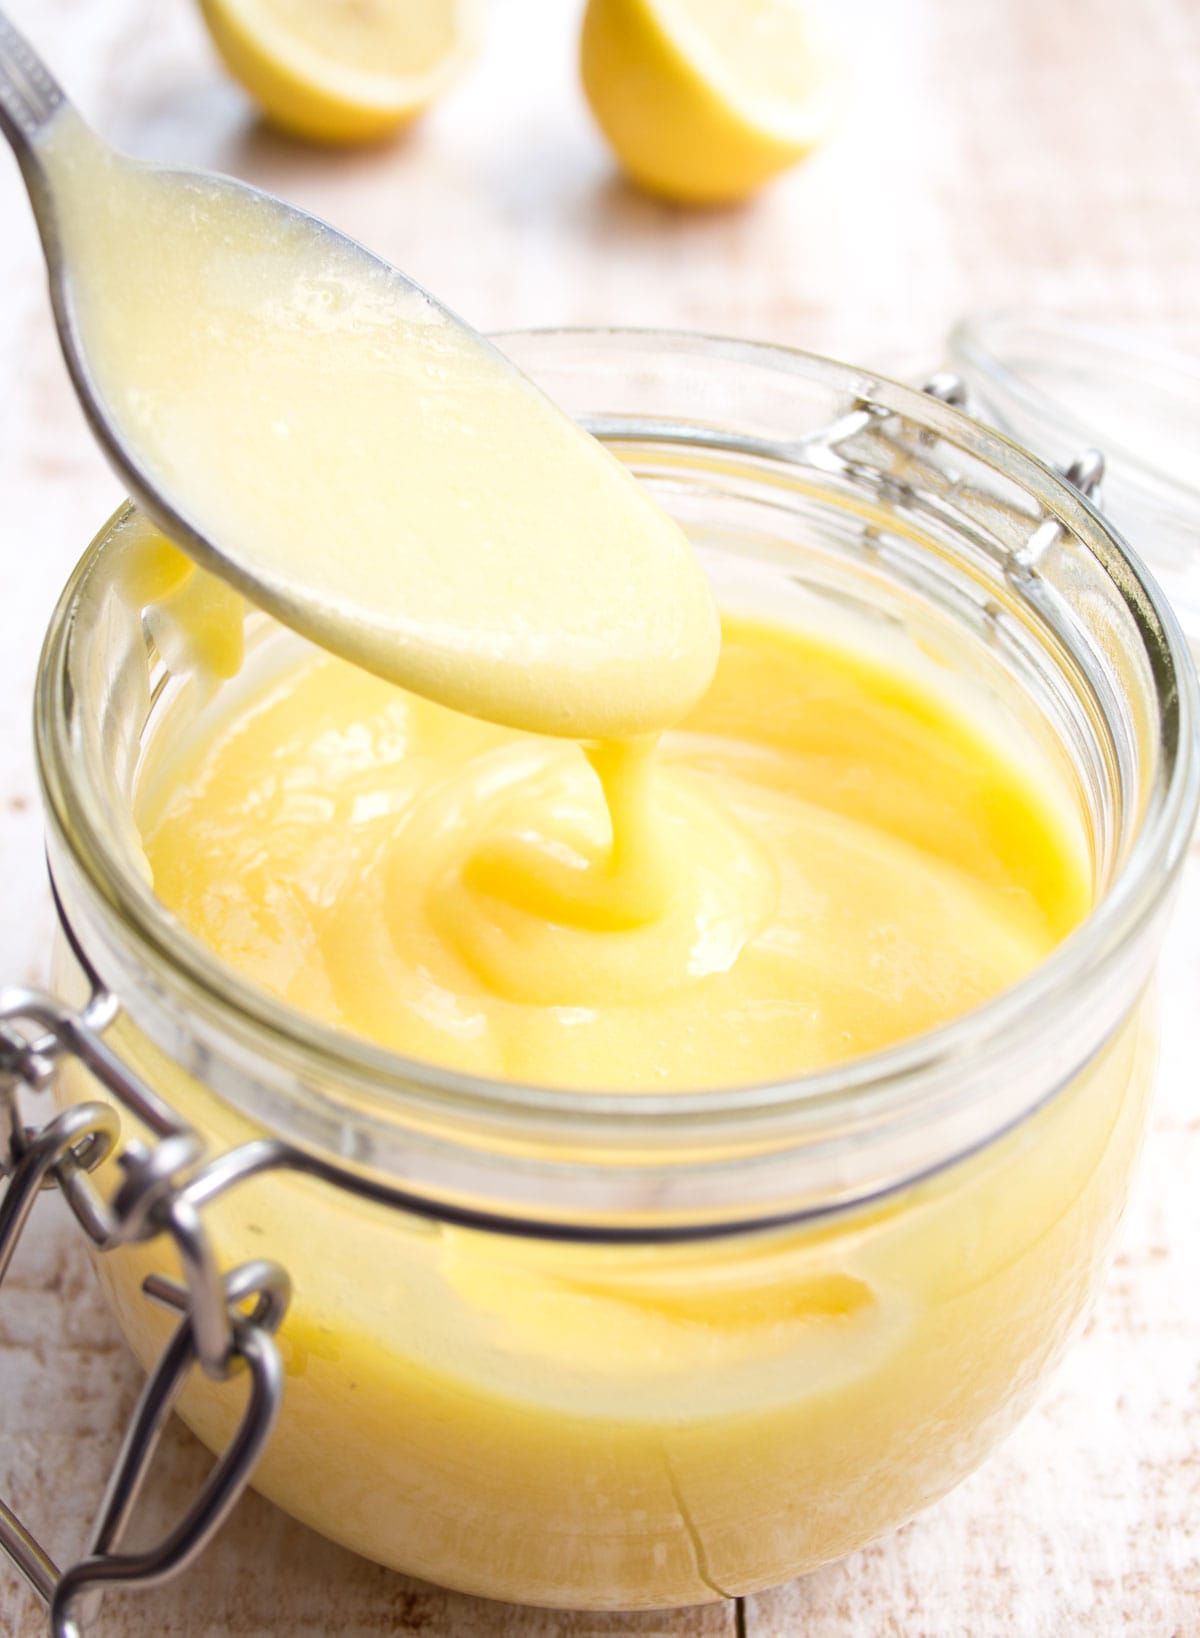 A spoon dipped into lemon curd.